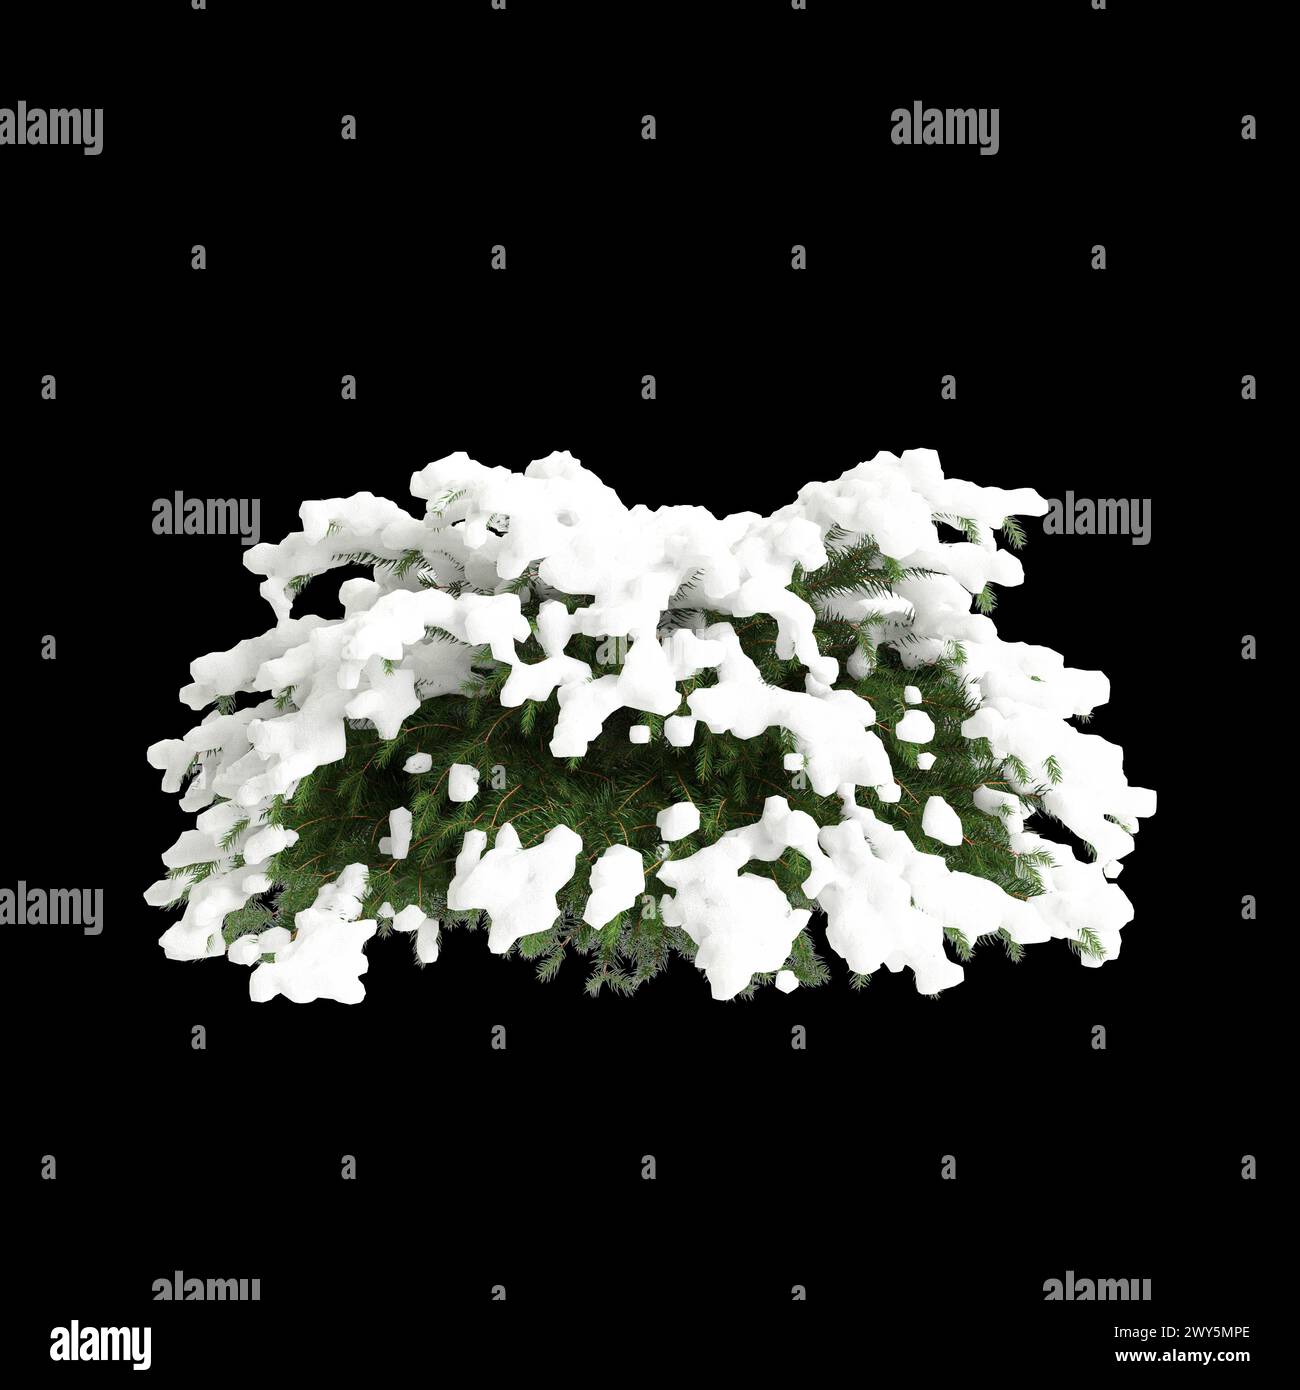 3d illustration of Picea abies Nidiformis snow covered tree isolated on black background Stock Photo